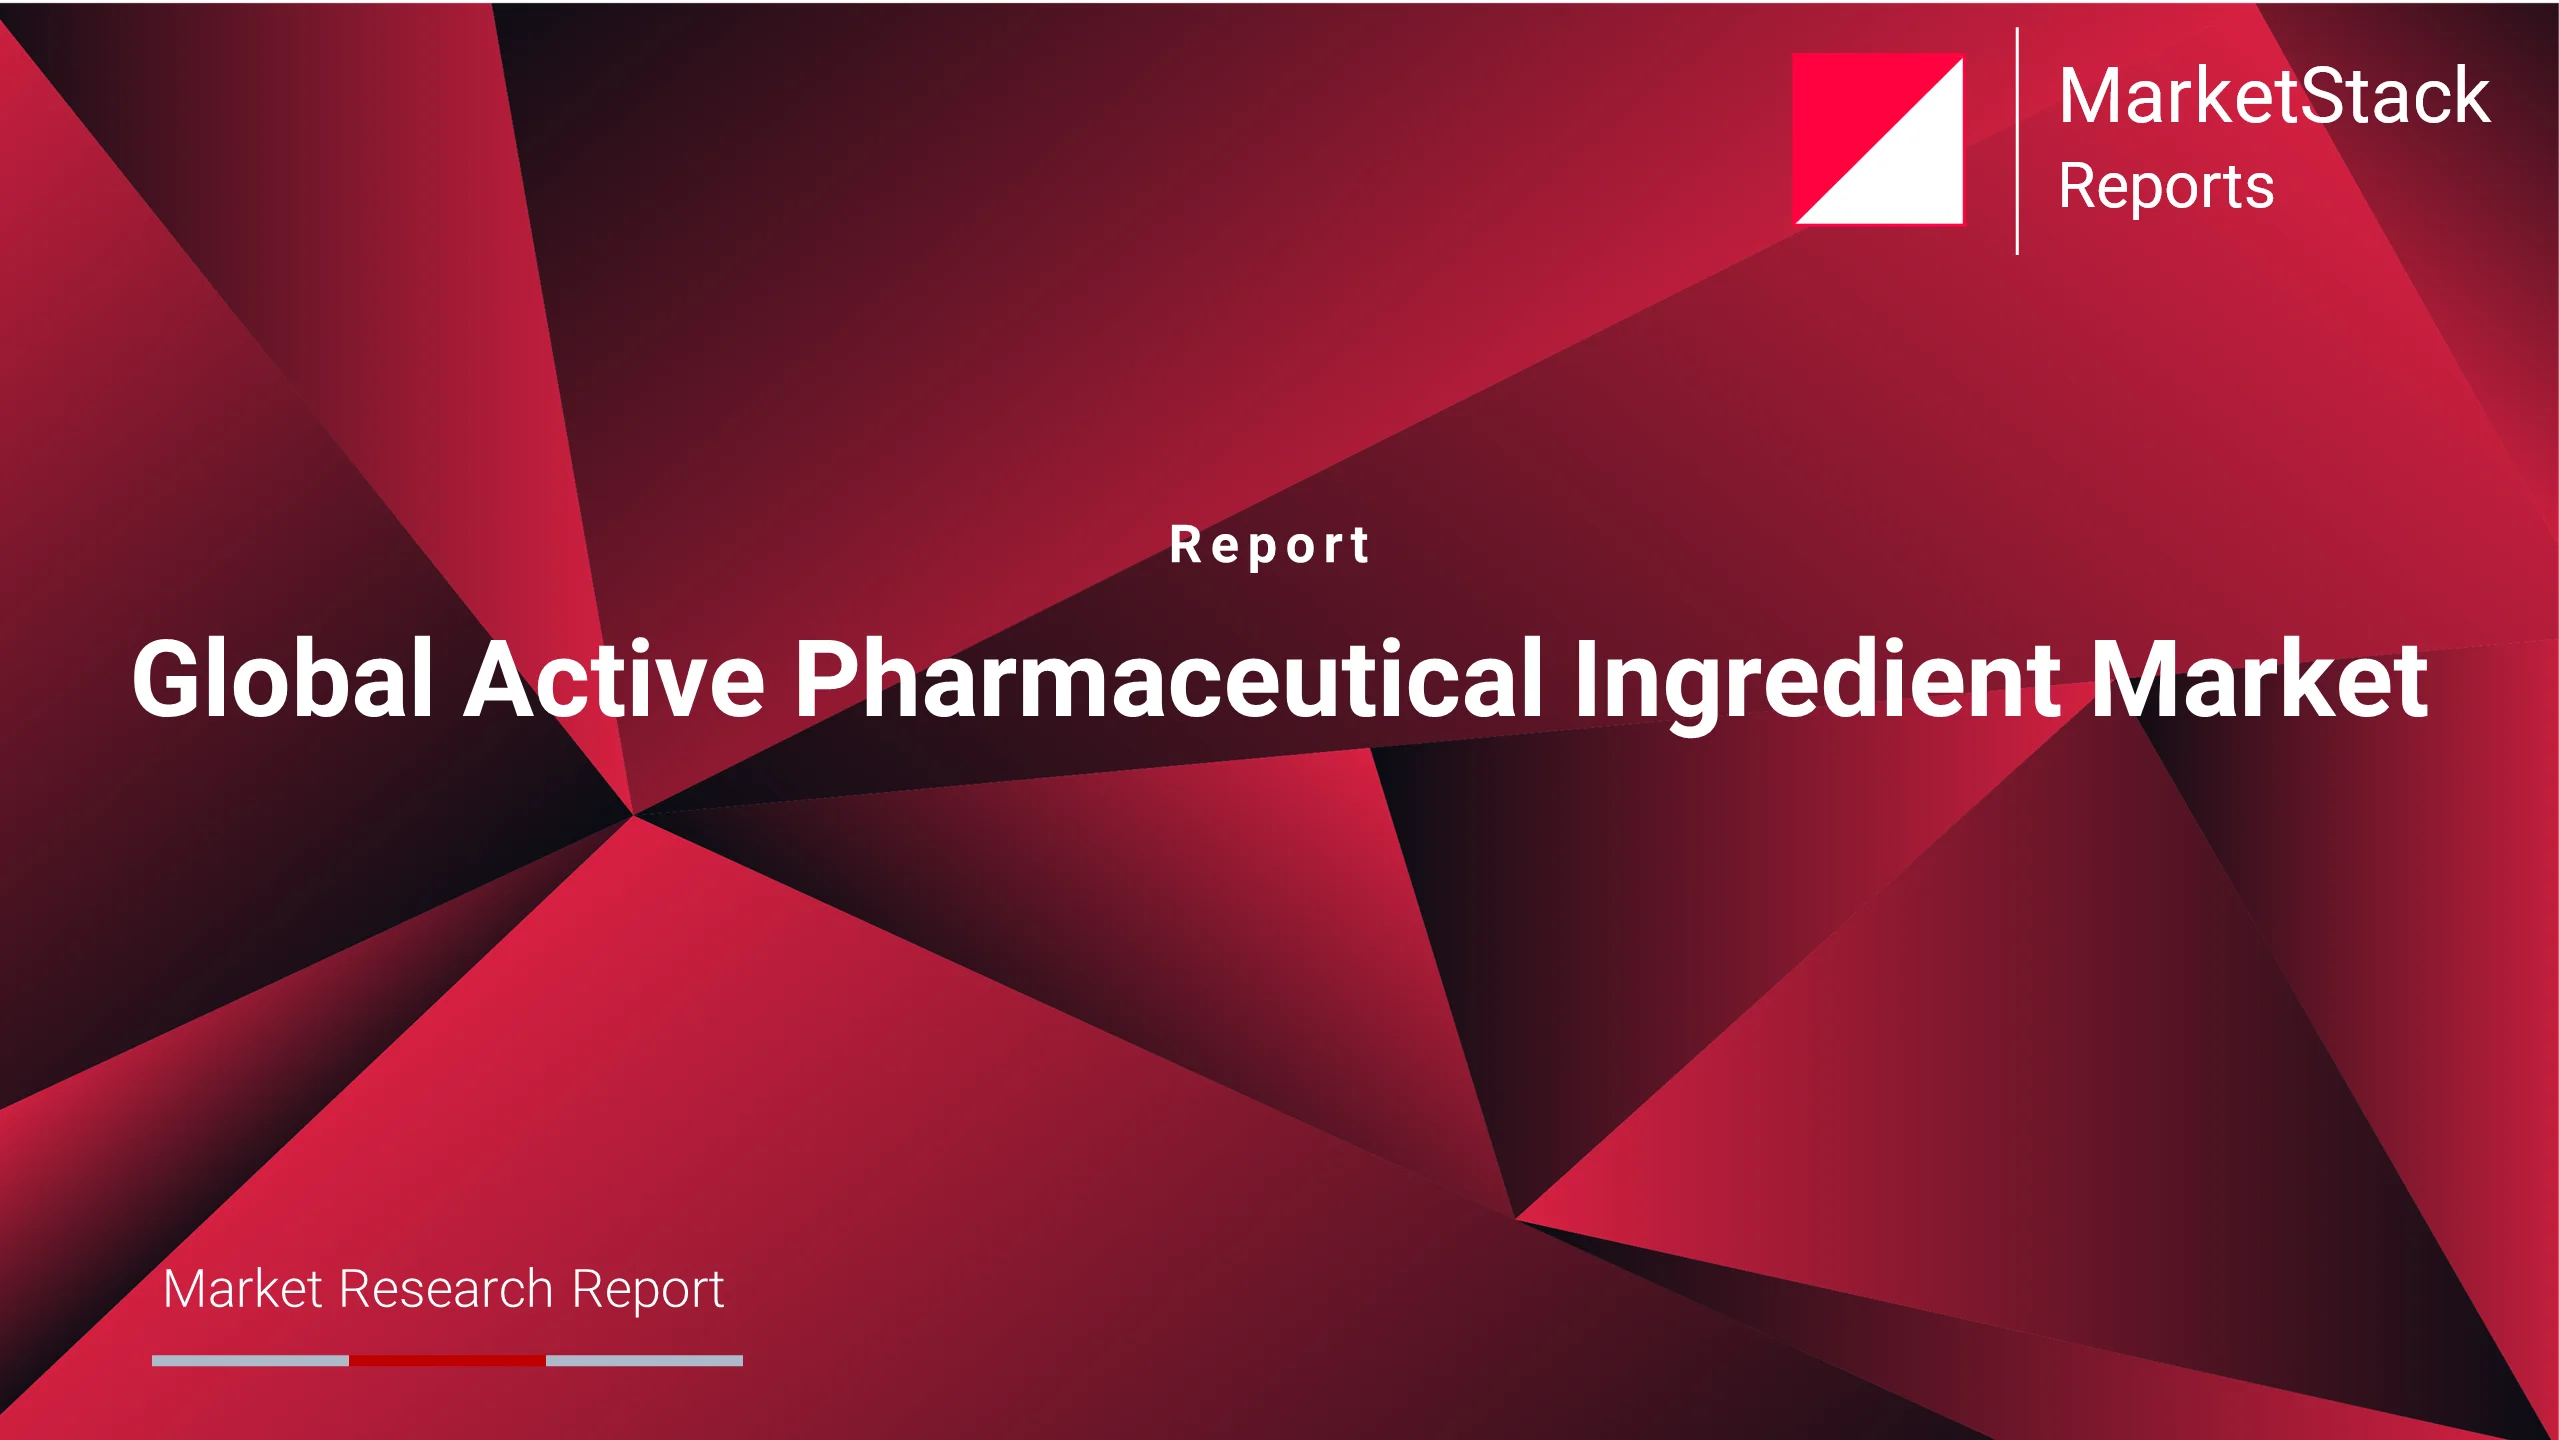 Global Active Pharmaceutical Ingredient Market Outlook to 2025